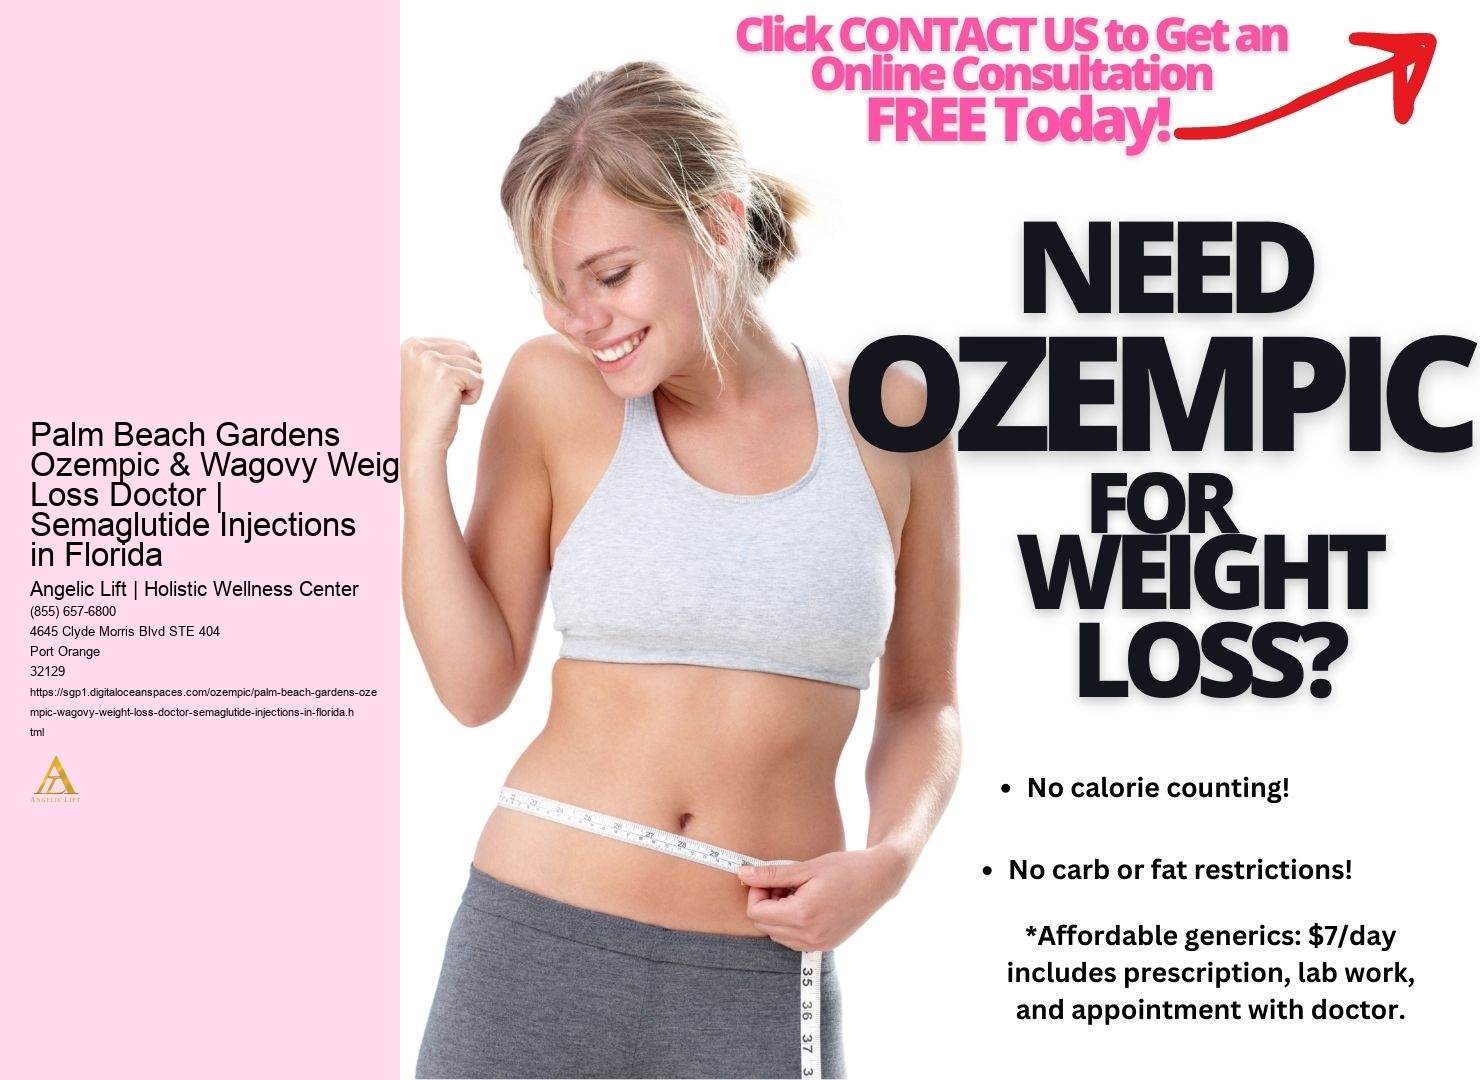 Palm Beach Gardens Ozempic & Wagovy Weight Loss Doctor | Semaglutide Injections in Florida